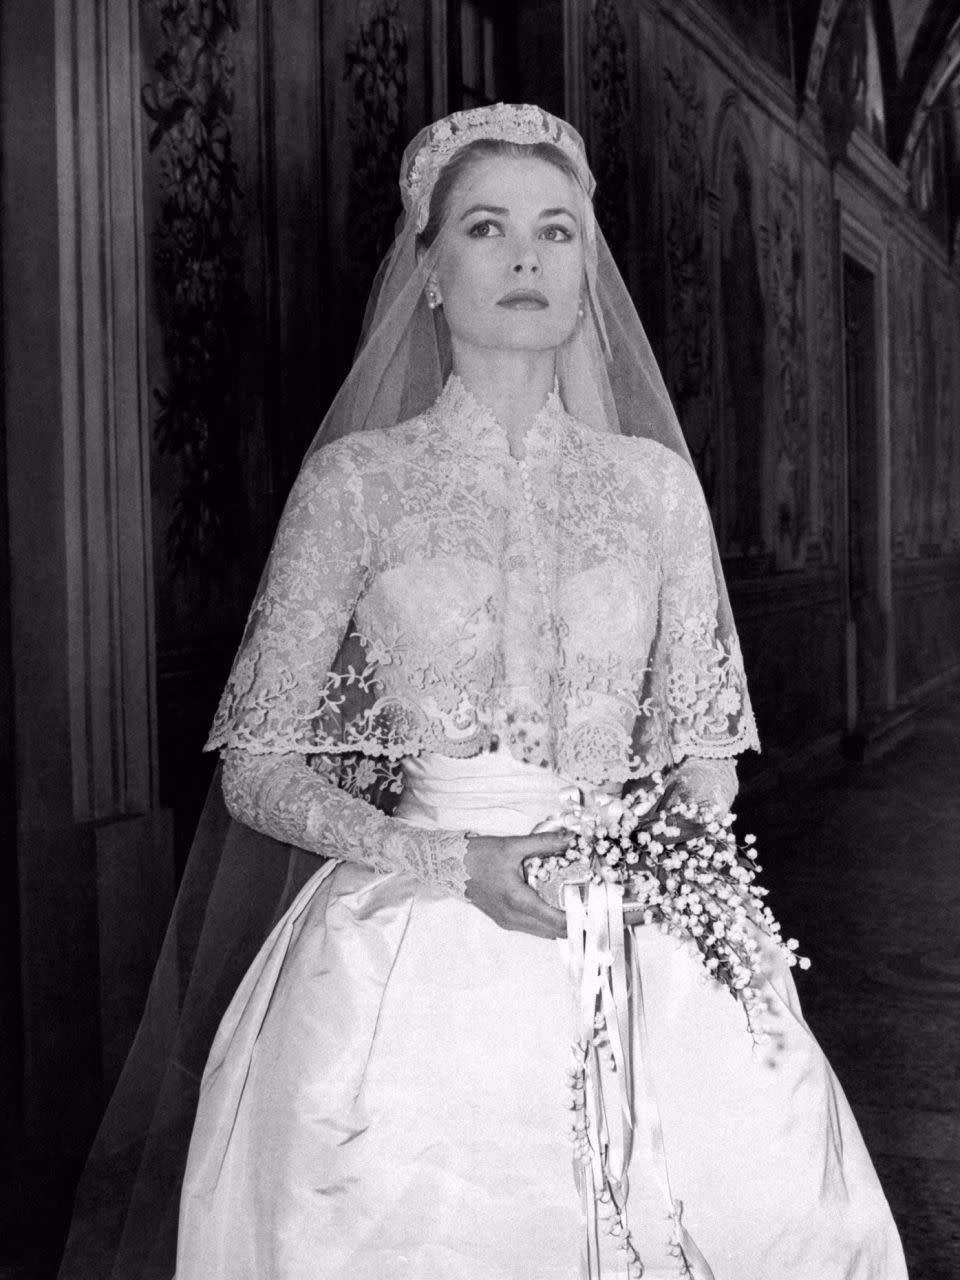 She said she drew inspiration for the design from Grace Kelly. Source: Getty